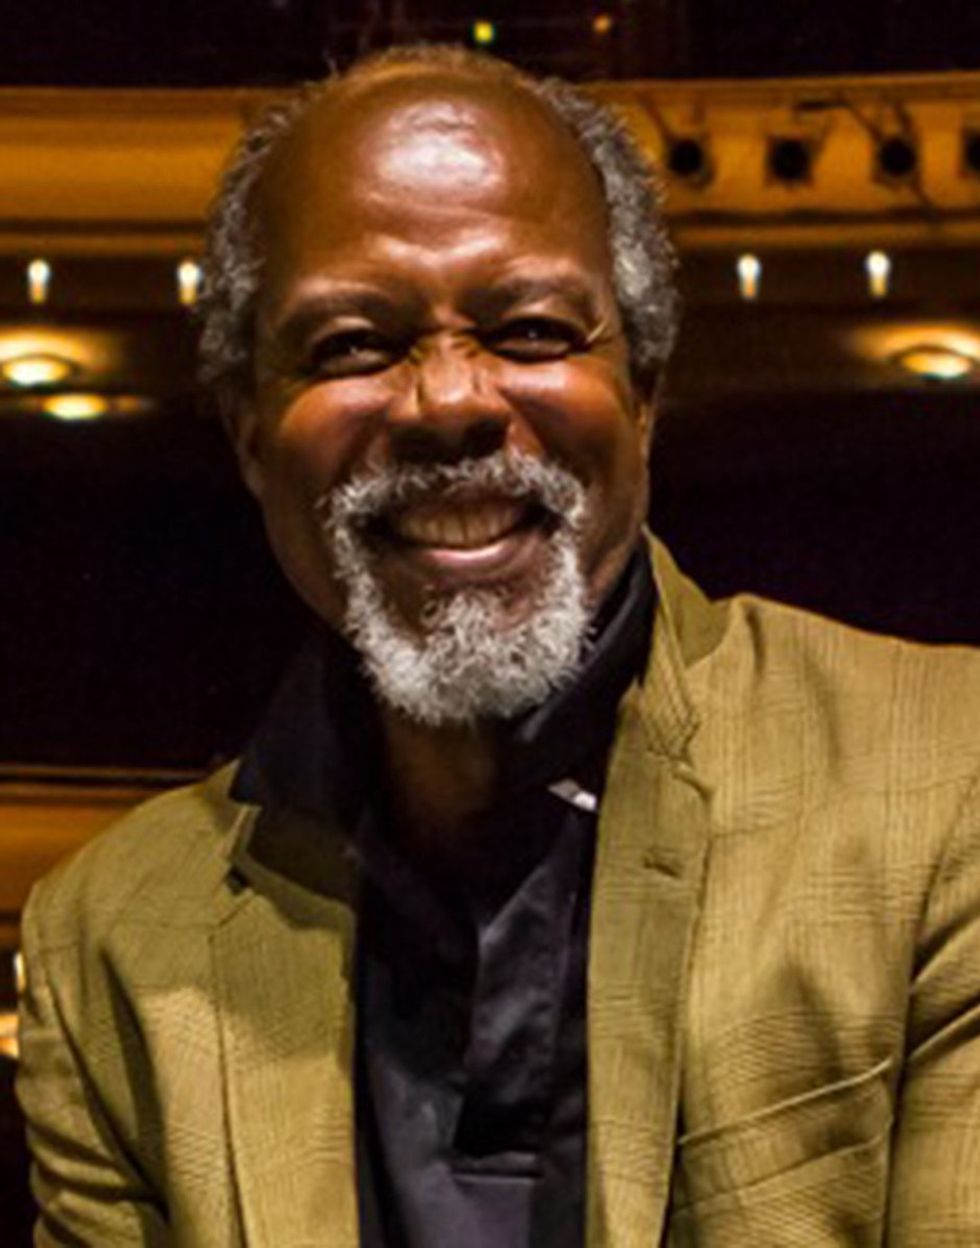 Clarence Gilyard Jr was known for roles in films such as Die Hard.